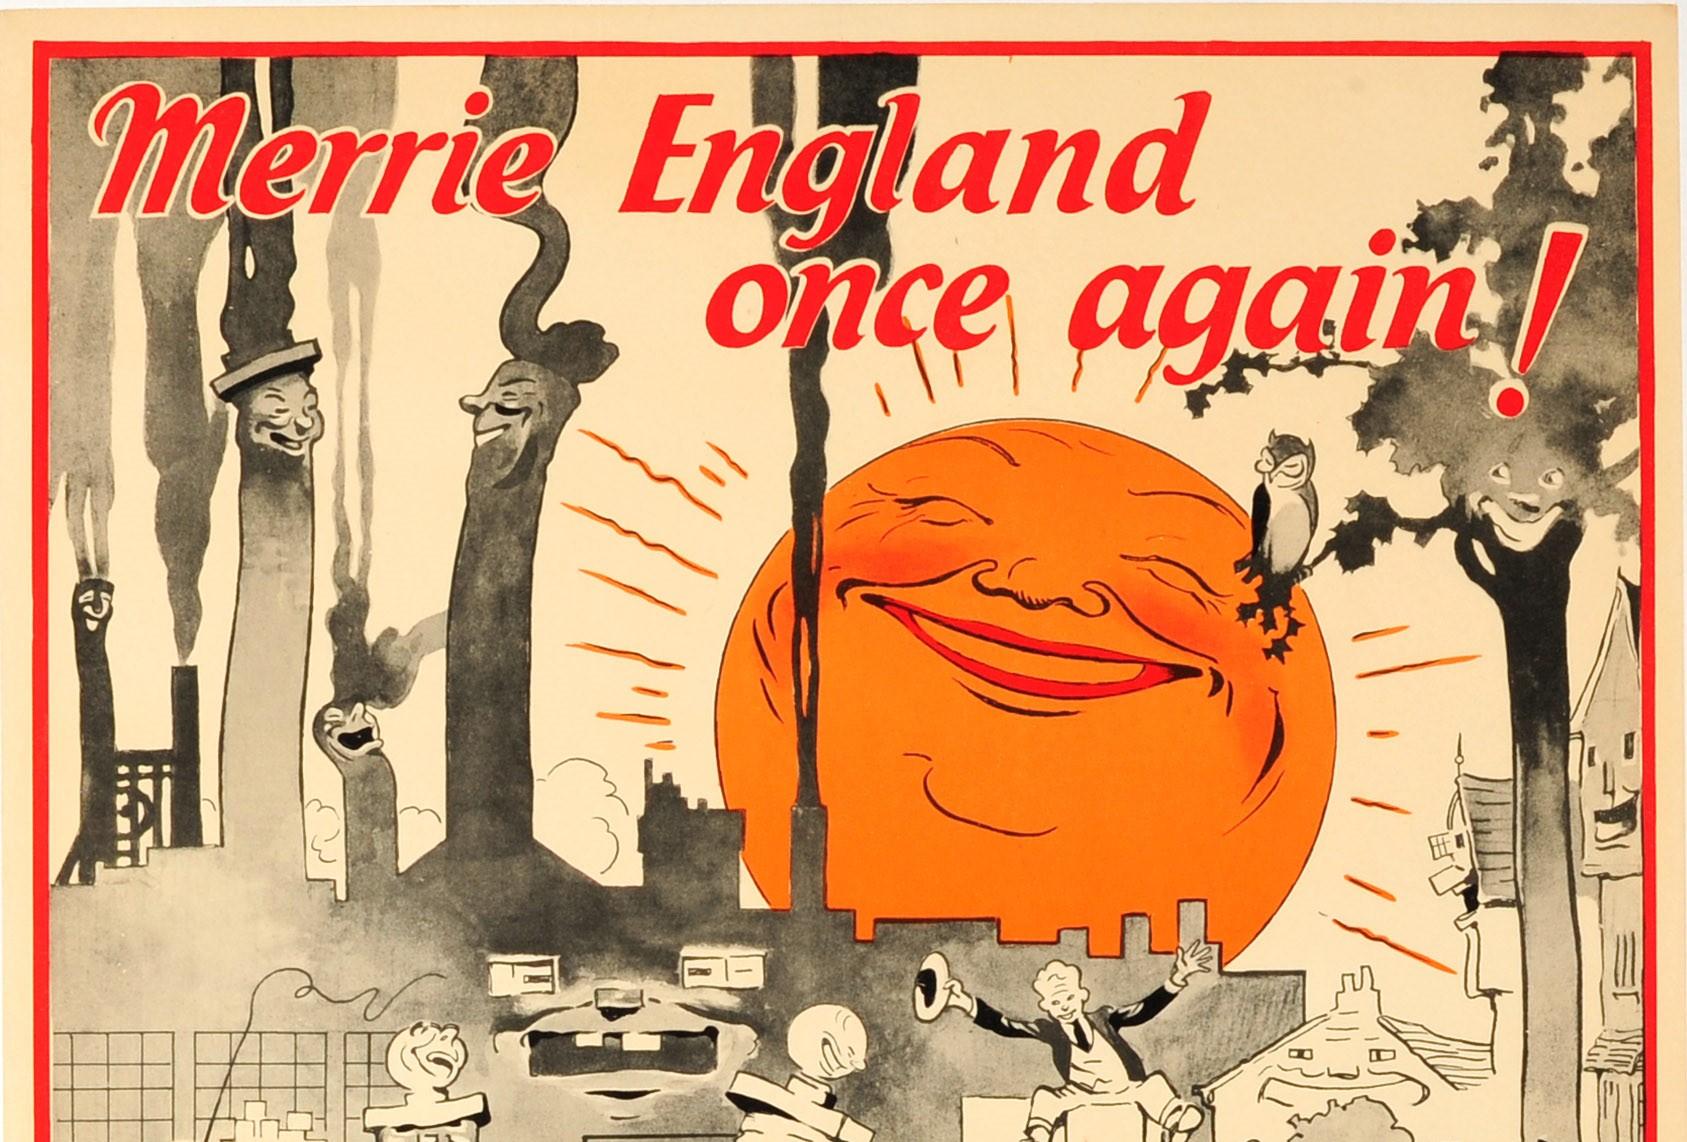 Original vintage advertising poster - Merrie England once again! Buy British and put a smile back into British trade - featuring a great illustration of a bright orange sun smiling over a black and white scene of people exporting British goods from